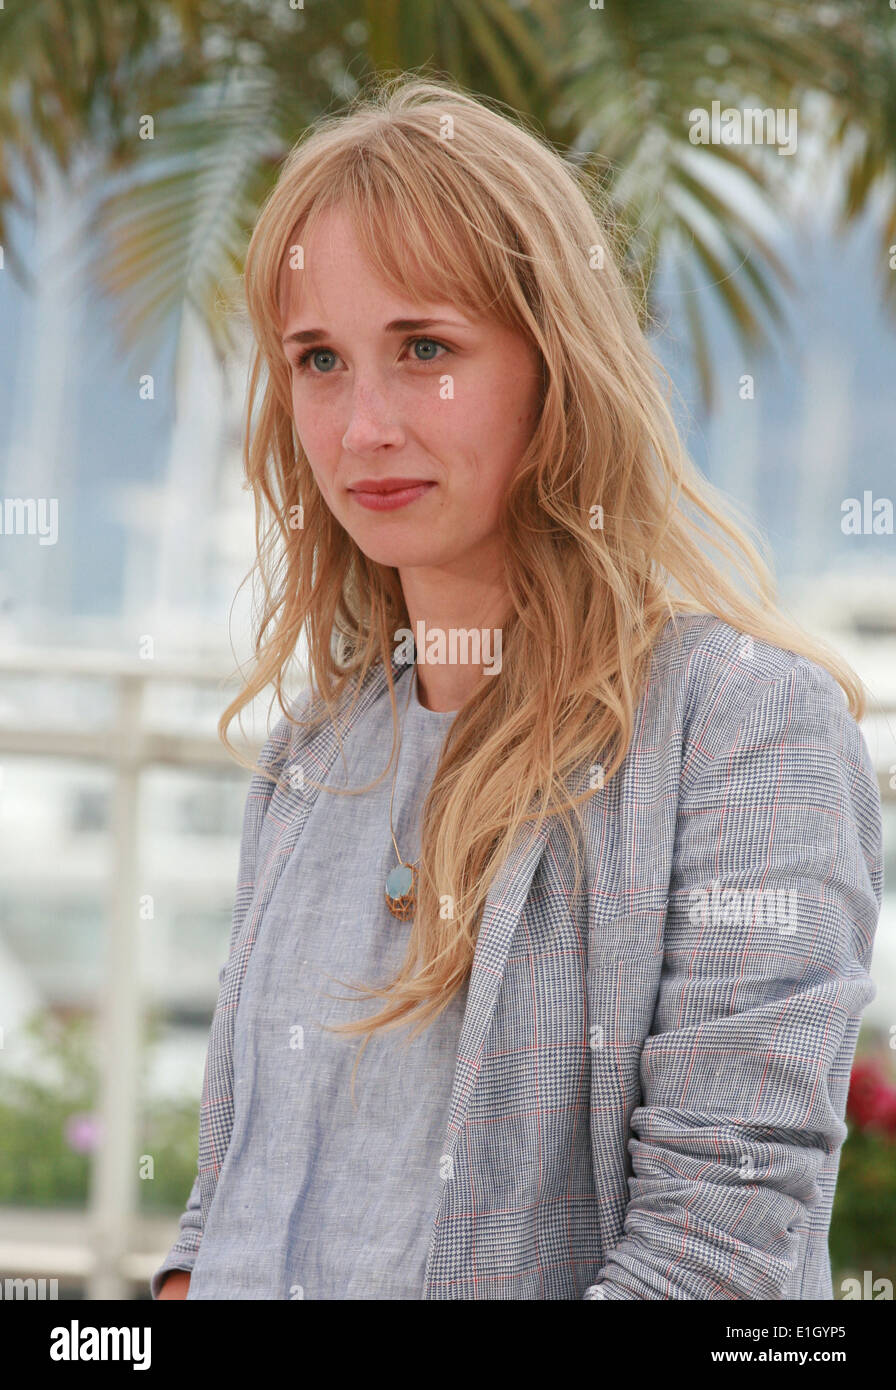 Actress Ingrid Garcia-jonsson at the photo call for the film Beautiful Youth (Hermosa Juventud) at the 67th Cannes Film Festival Stock Photo